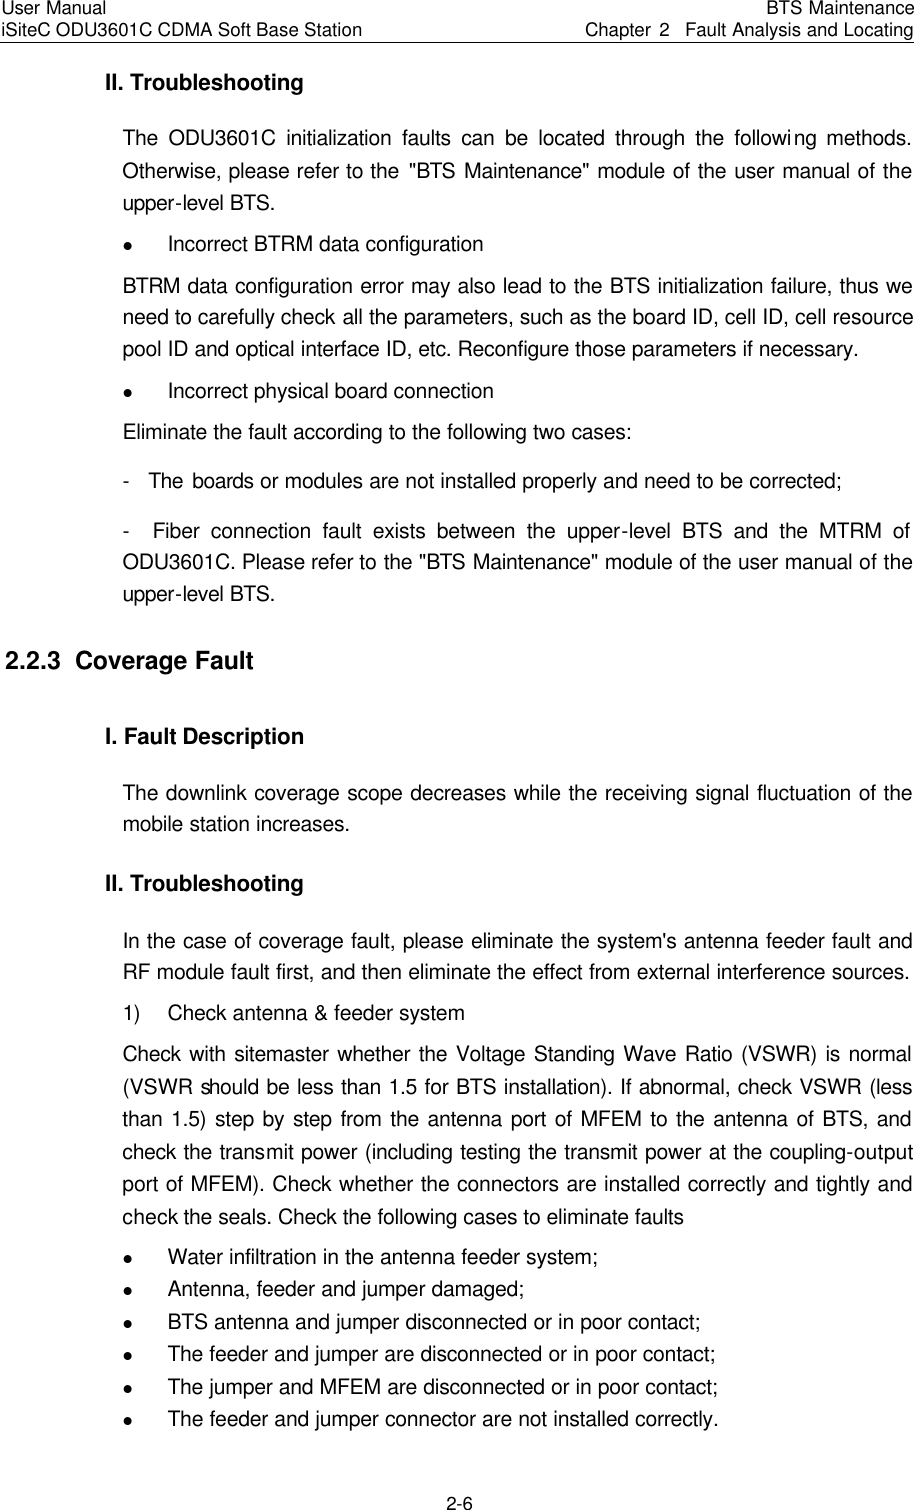 User Manual iSiteC ODU3601C CDMA Soft Base Station BTS MaintenanceChapter 2  Fault Analysis and Locating 2-6　II. Troubleshooting　The ODU3601C initialization faults can be located through the following methods. Otherwise, please refer to the &quot;BTS Maintenance&quot; module of the user manual of the upper-level BTS. l Incorrect BTRM data configuration　BTRM data configuration error may also lead to the BTS initialization failure, thus we need to carefully check all the parameters, such as the board ID, cell ID, cell resource pool ID and optical interface ID, etc. Reconfigure those parameters if necessary.  　l Incorrect physical board connection  　Eliminate the fault according to the following two cases: -  The boards or modules are not installed properly and need to be corrected;   -  Fiber connection fault exists between the upper-level BTS and the MTRM of ODU3601C. Please refer to the &quot;BTS Maintenance&quot; module of the user manual of the upper-level BTS. 2.2.3  Coverage Fault I. Fault Description   The downlink coverage scope decreases while the receiving signal fluctuation of the mobile station increases. II. Troubleshooting　In the case of coverage fault, please eliminate the system&apos;s antenna feeder fault and RF module fault first, and then eliminate the effect from external interference sources.   1) Check antenna &amp; feeder system　Check with sitemaster whether the Voltage Standing Wave Ratio (VSWR) is normal (VSWR should be less than 1.5 for BTS installation). If abnormal, check VSWR (less than 1.5) step by step from the antenna port of MFEM to the antenna of BTS, and check the transmit power (including testing the transmit power at the coupling-output port of MFEM). Check whether the connectors are installed correctly and tightly and check the seals. Check the following cases to eliminate faults   l Water infiltration in the antenna feeder system;  　l Antenna, feeder and jumper damaged;  　l BTS antenna and jumper disconnected or in poor contact;   l The feeder and jumper are disconnected or in poor contact;  　l The jumper and MFEM are disconnected or in poor contact;   l The feeder and jumper connector are not installed correctly.  　